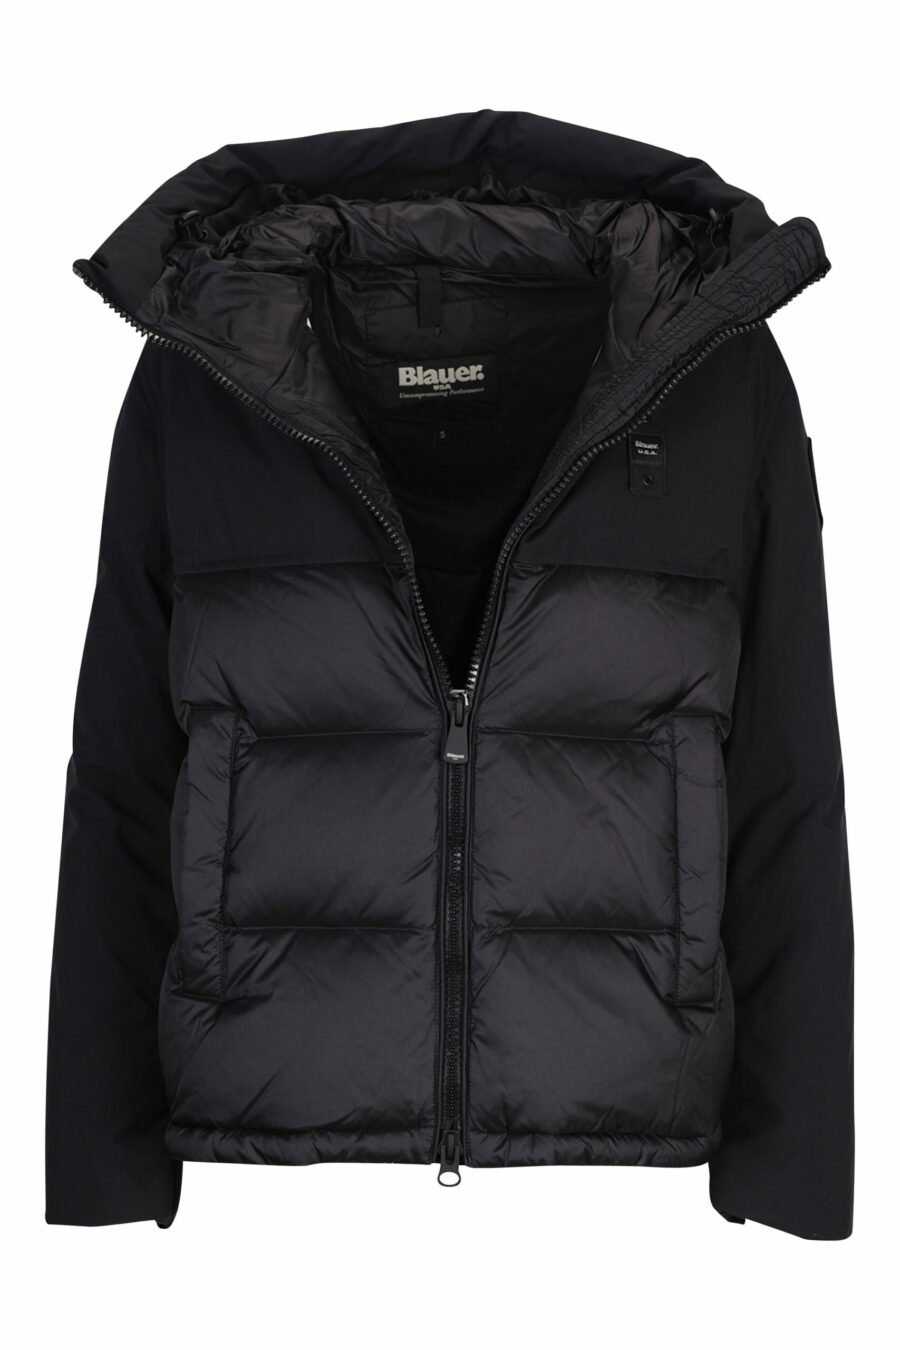 Black hooded jacket with straight lines and logo patch - 8058610647407 3 scaled